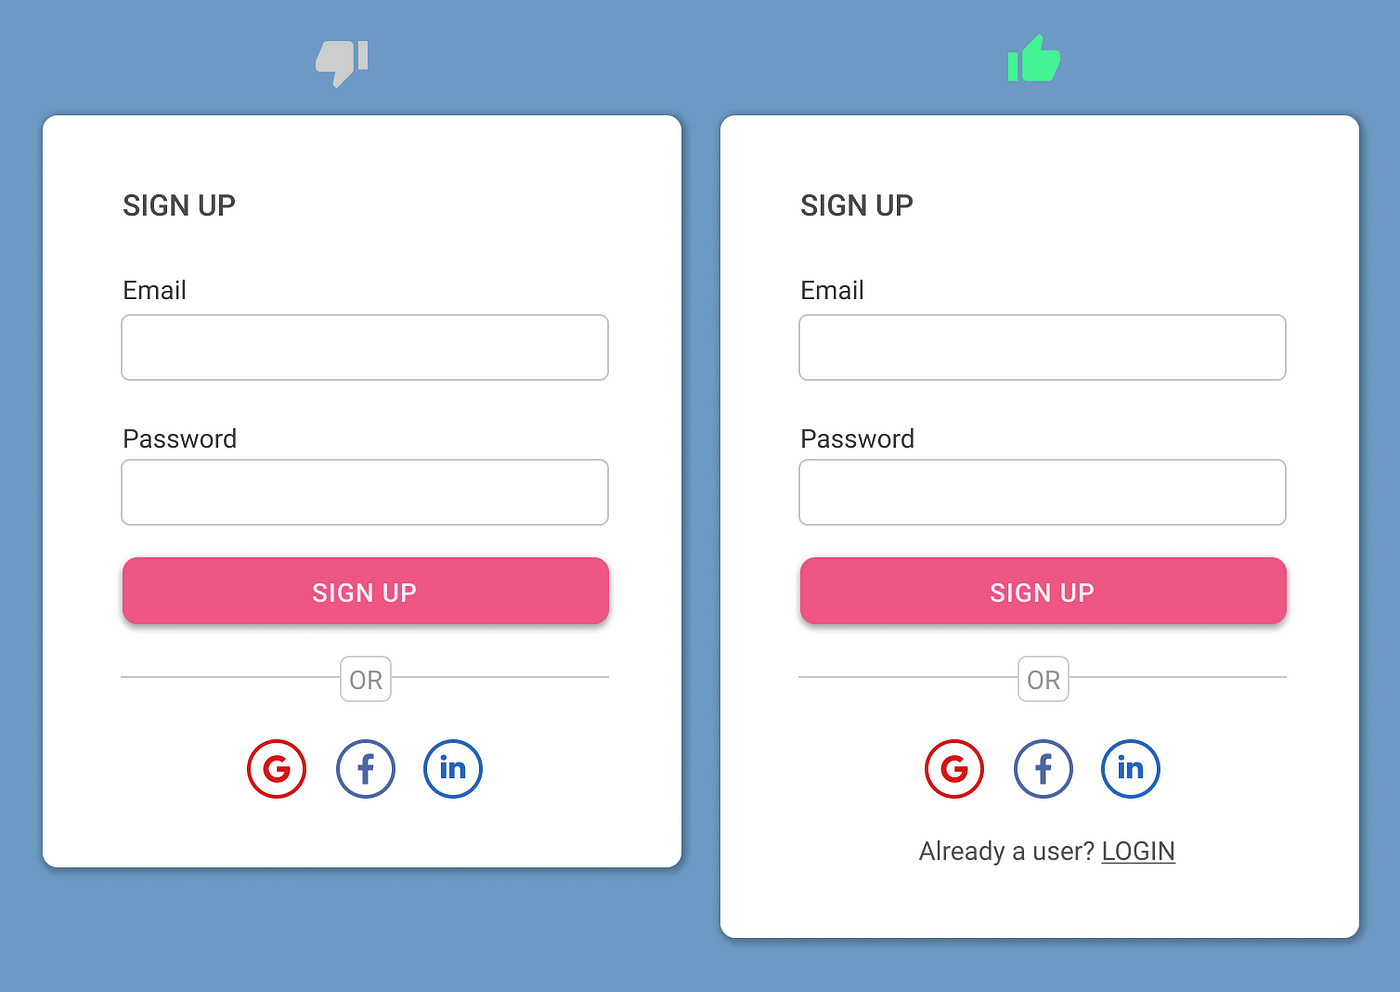 12 Best Practices for Sign-Up and Login Page Design, by Saadia Minhas